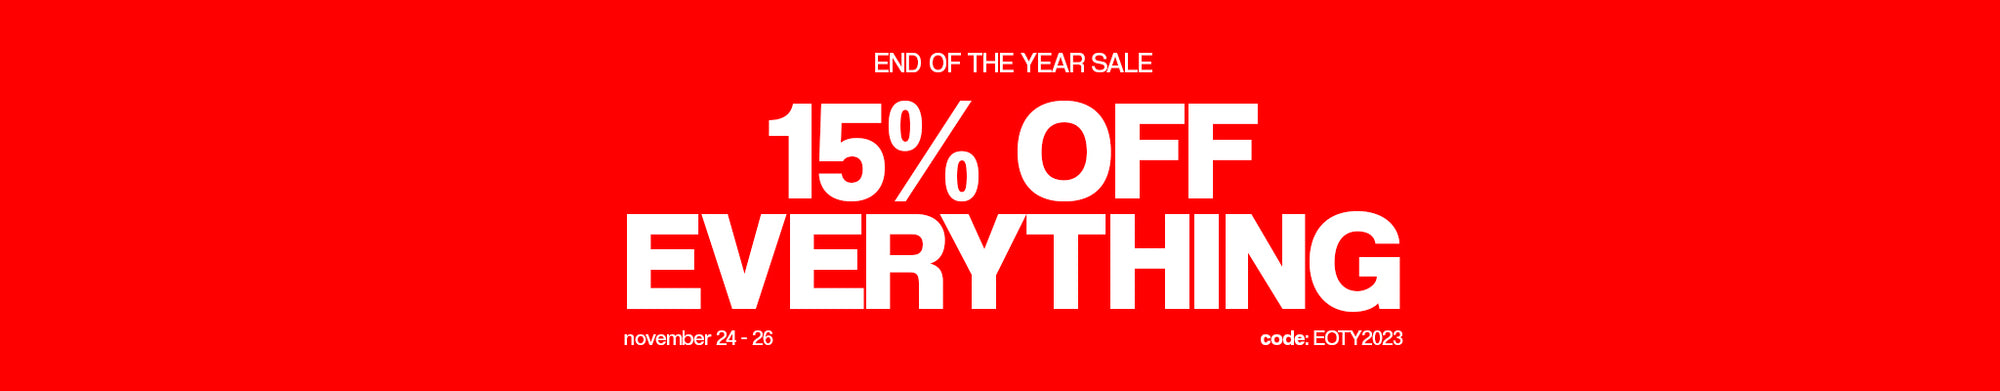 END OF THE YEAR SALE